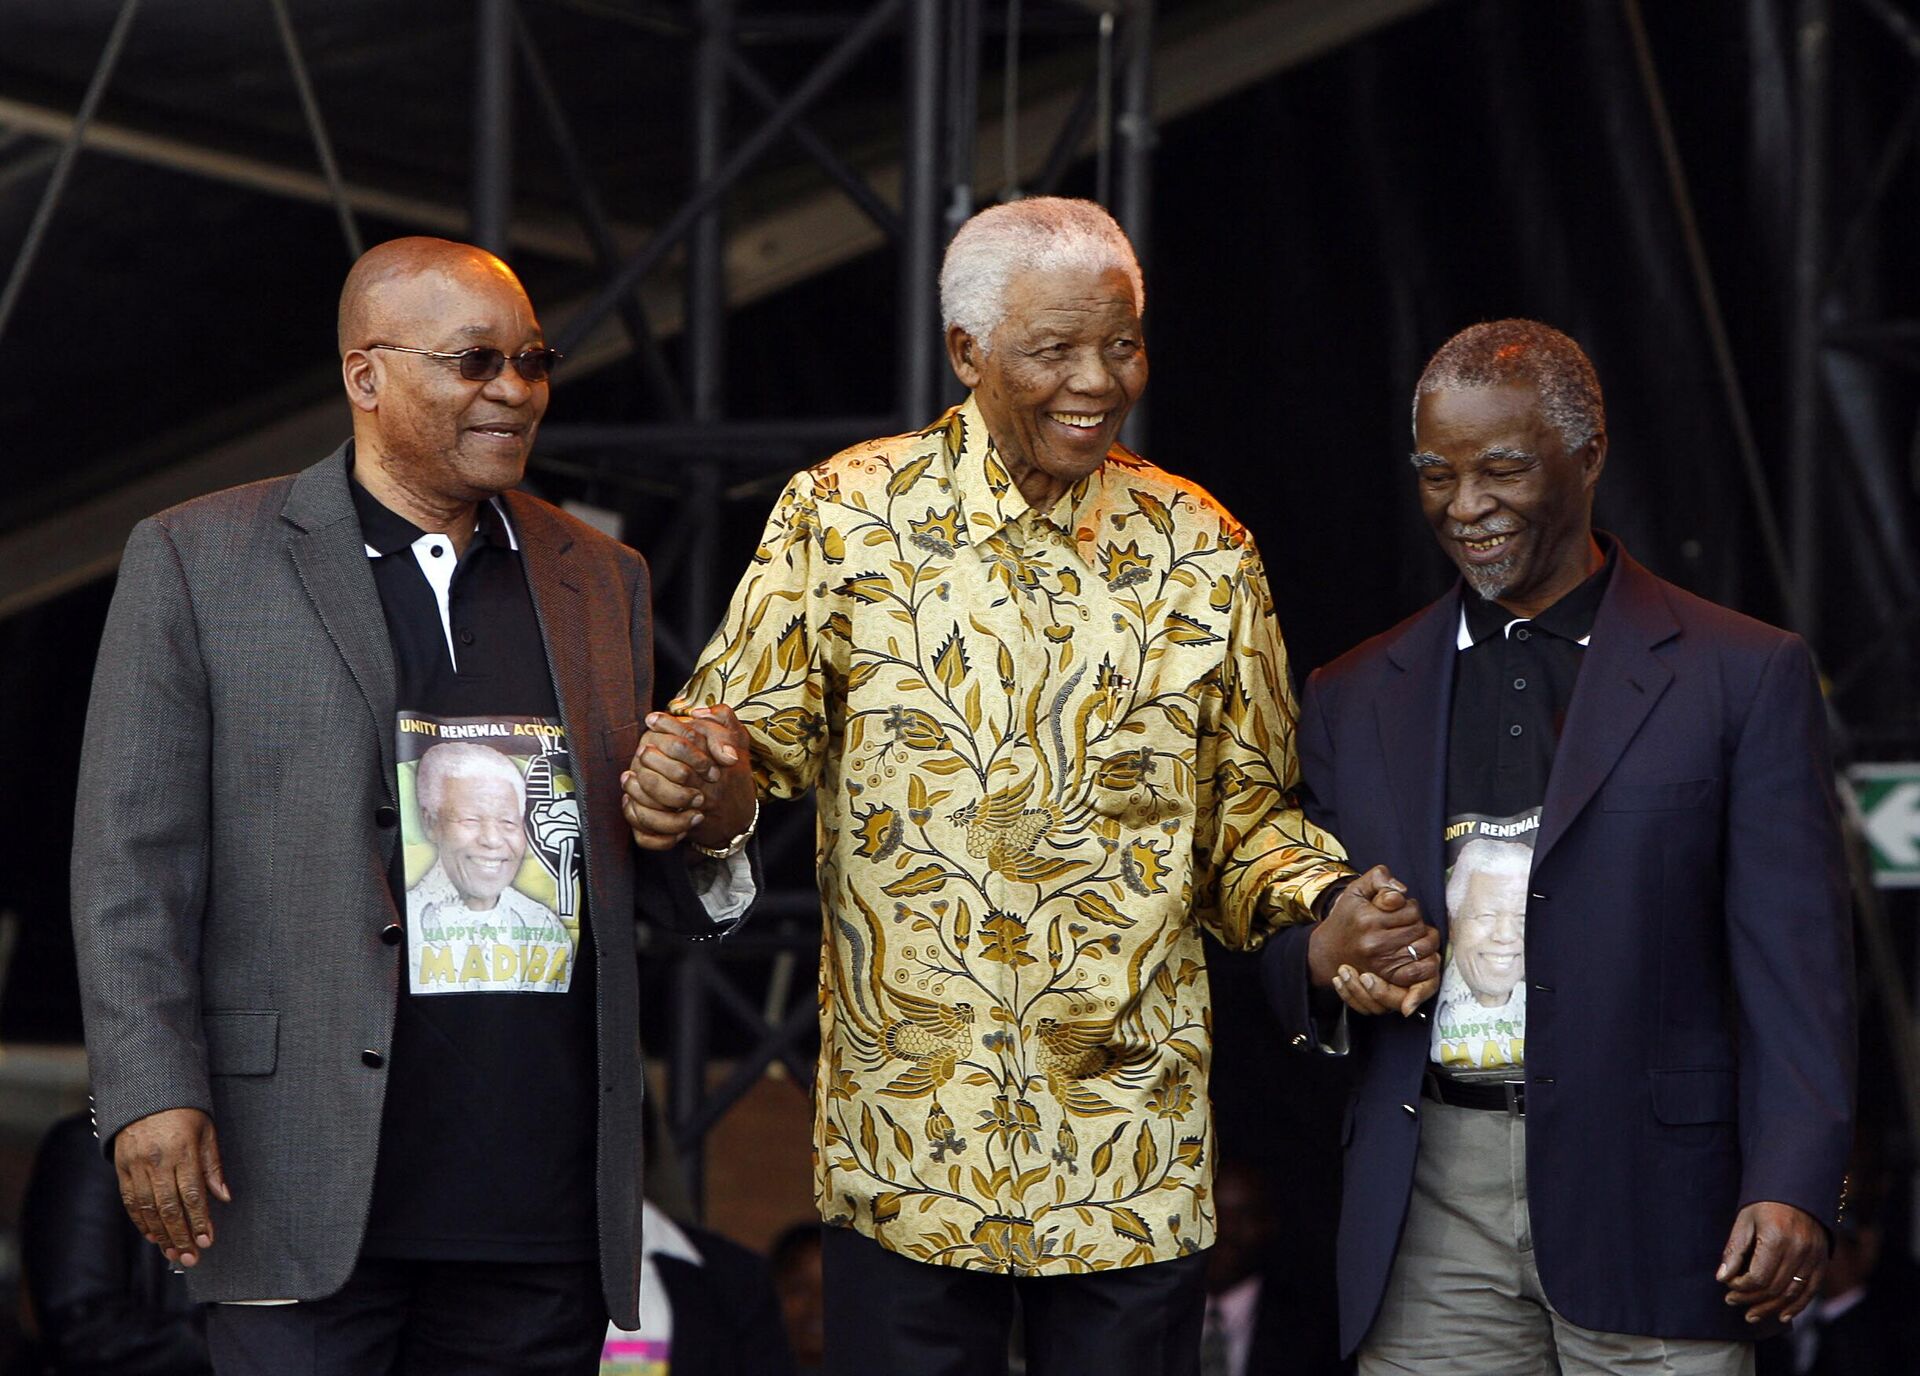 Former South African president and Nobel peace prize laureate Nelson Mandela (C) ANC president Jacob Zuma (L) and South African president Thabo Mbeki (R) arrive on August 02, 2008  on stage during the Mandela 90th birthday ANC celebration at Loftus stadium in Pretoria, South Africa. - Sputnik International, 1920, 05.12.2022